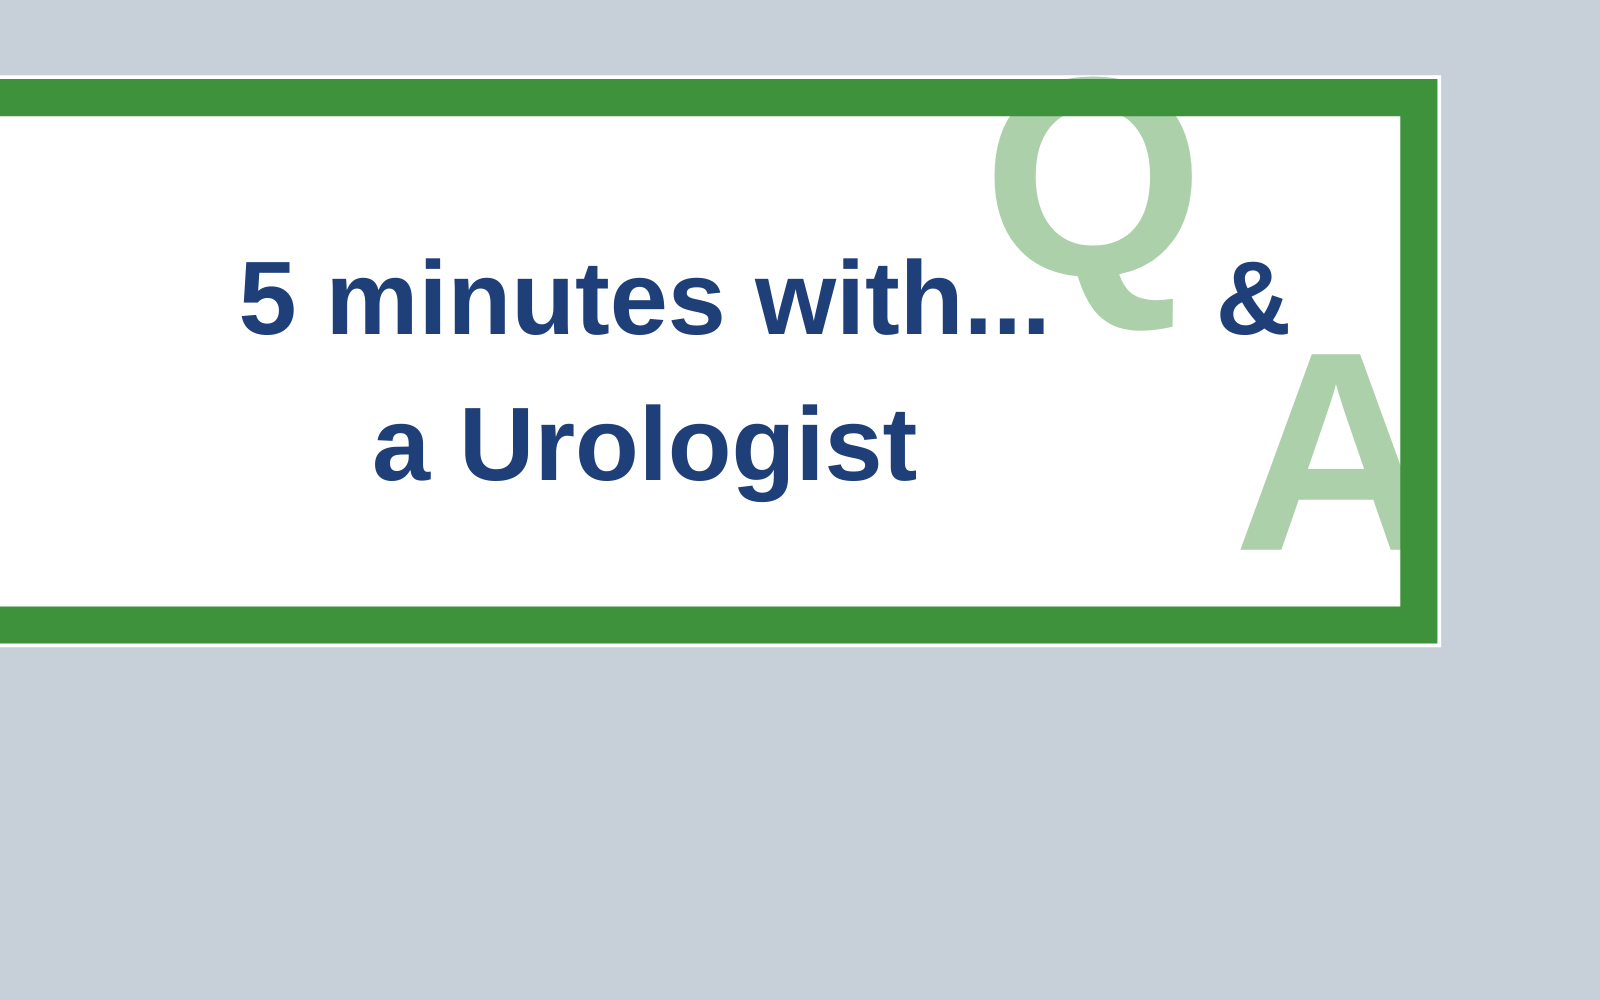 5 minutes with a Urologist - Consultant Connect